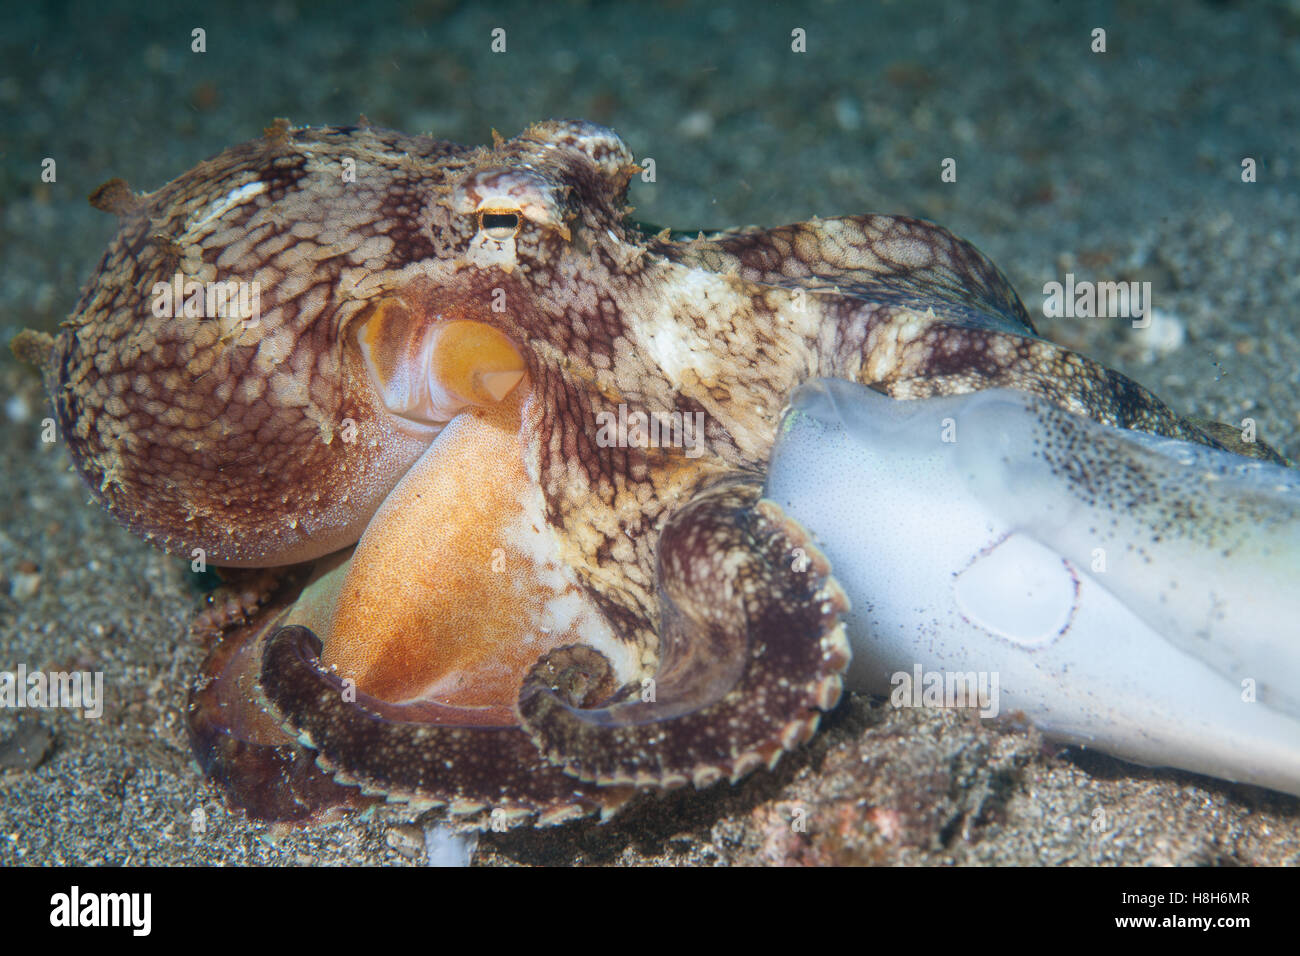 A Coconut octopus (Amphiooctopus marginatus) feeds on a squid on the sandy seafloor of Lembeh Strait, Indonesia. Stock Photo